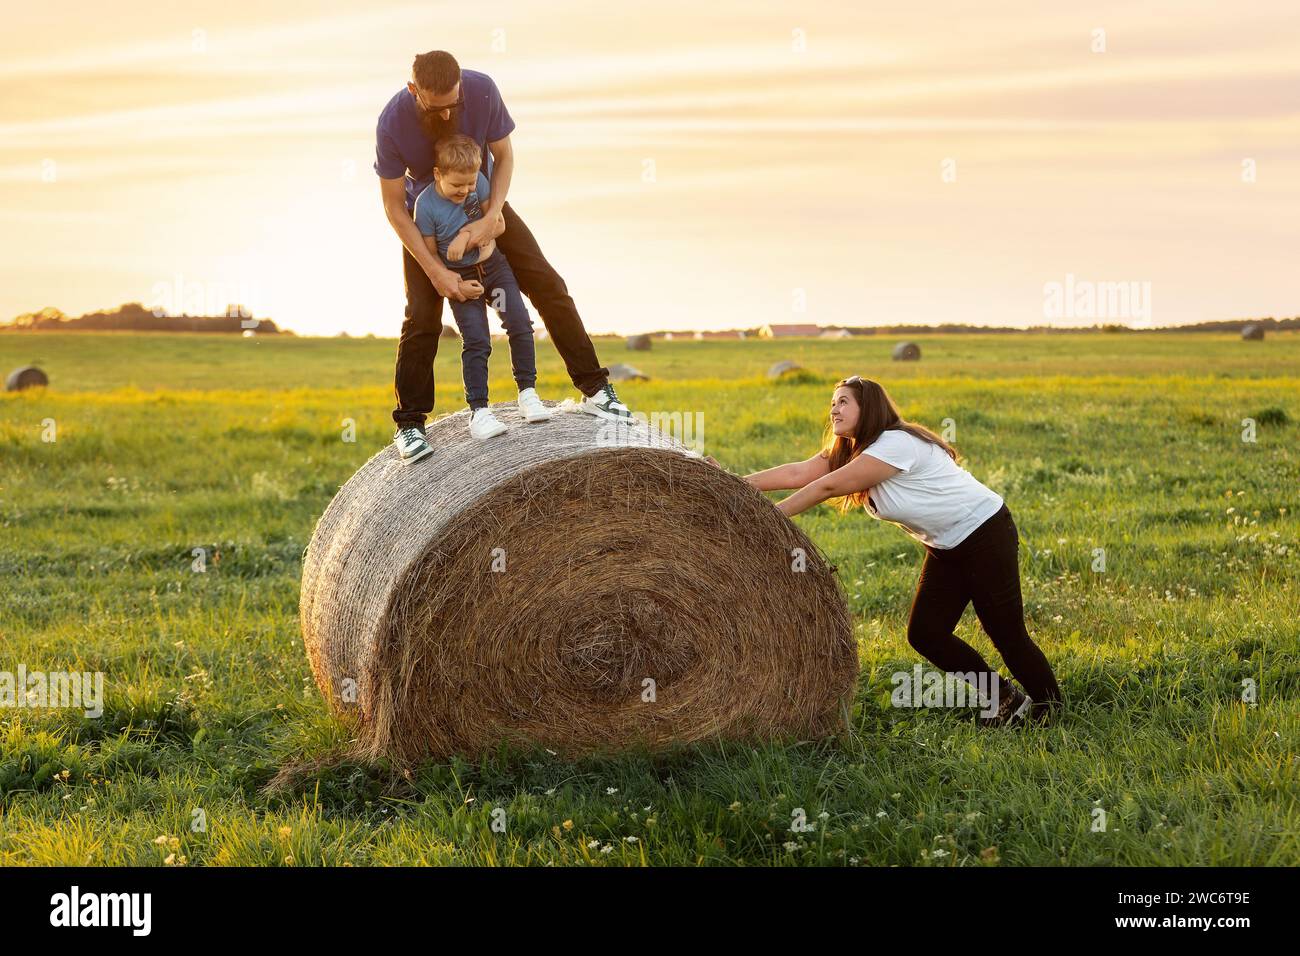 Fun family games on a rural lawn outside in the evening at sunset. A mother pushes a hay roll and wants her husband and son to fall. A harmonious fami Stock Photo